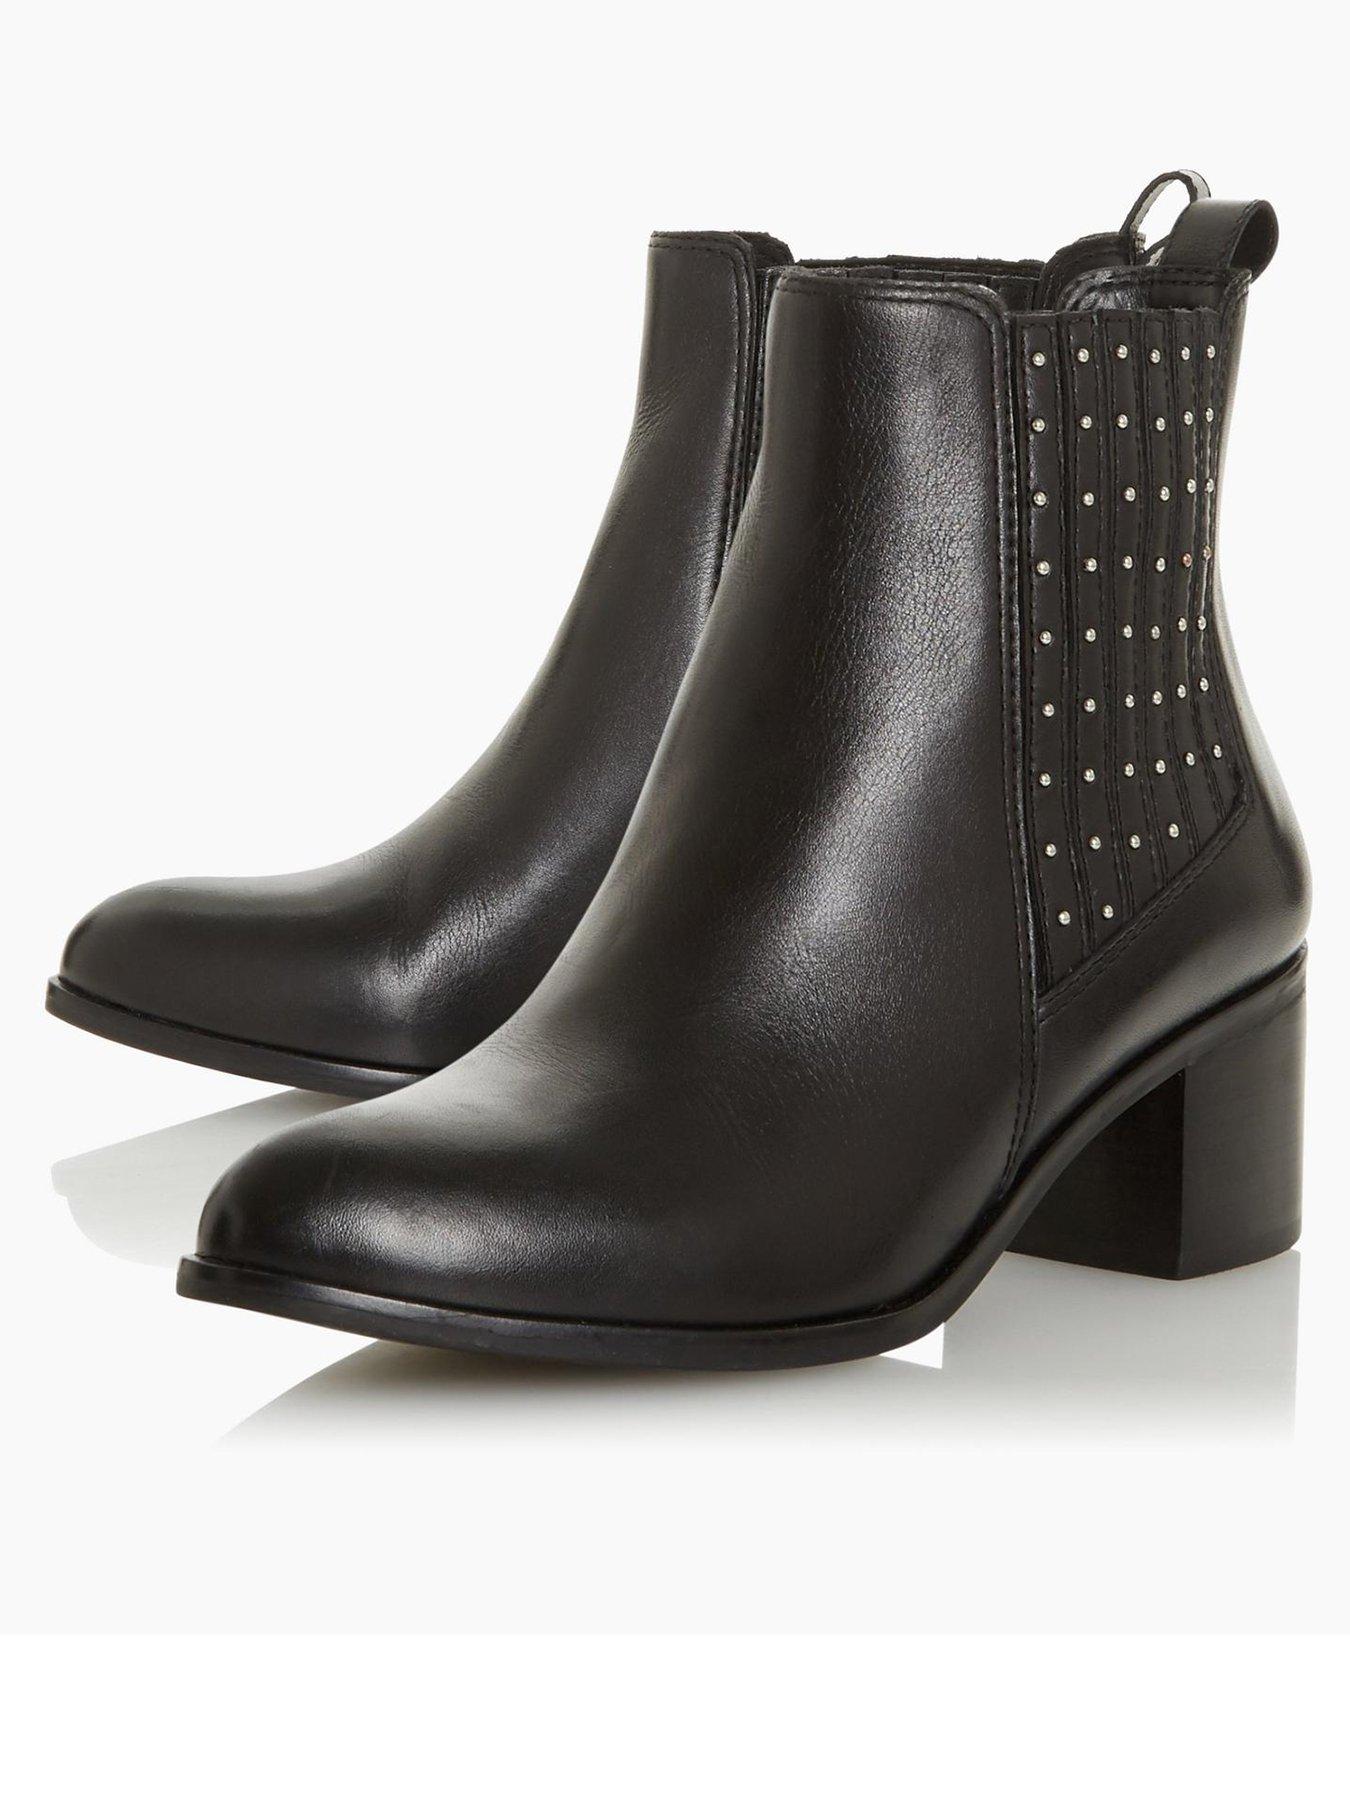 ankle boots next day delivery